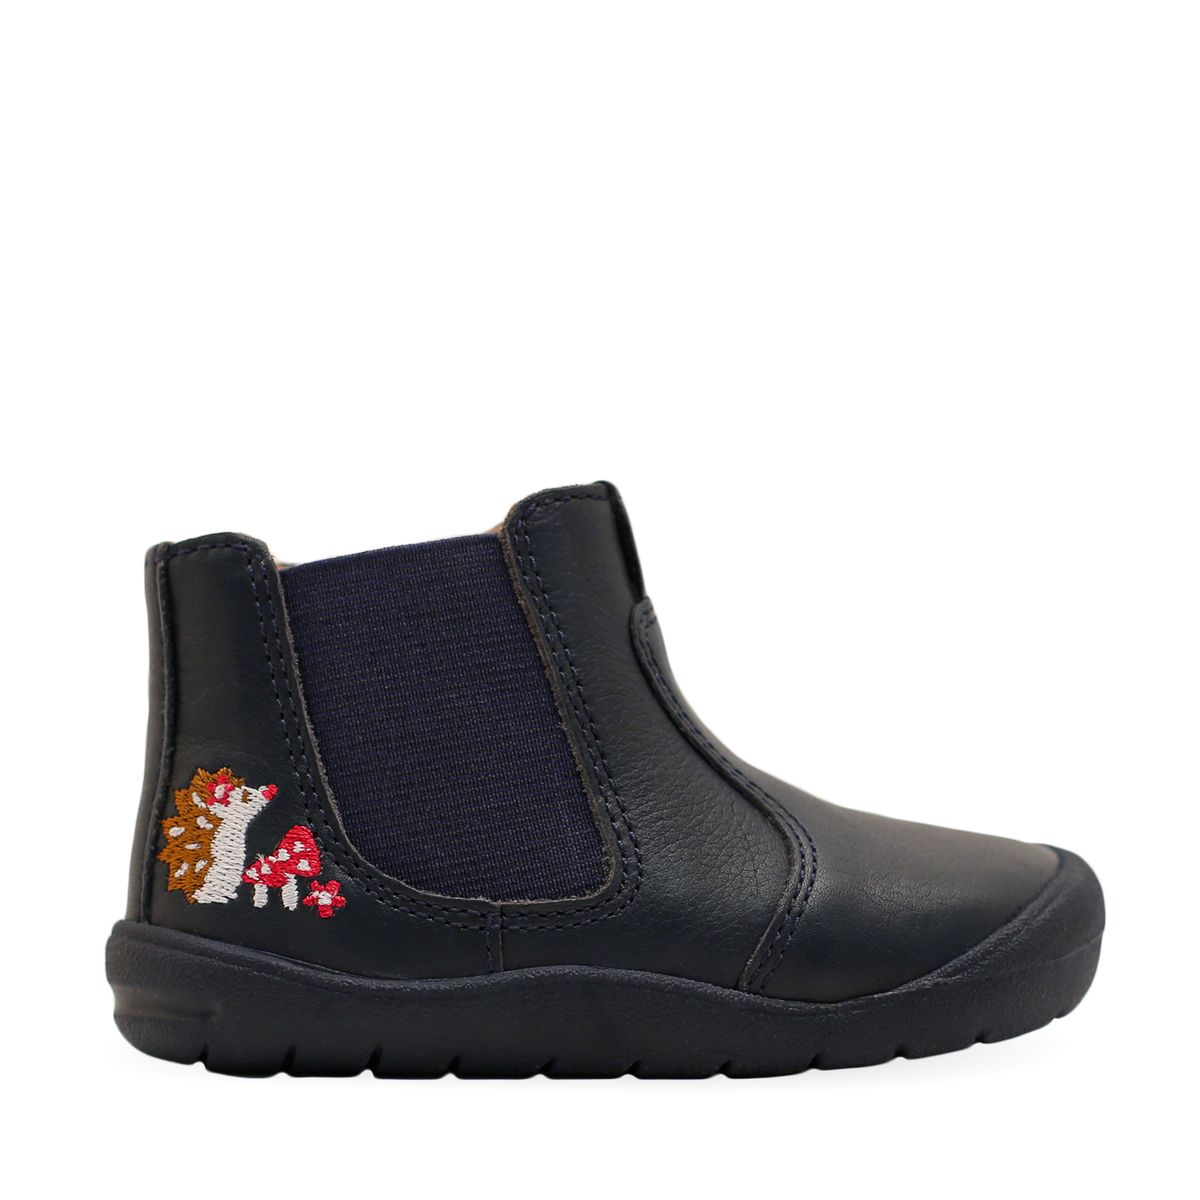 'Friend' in Navy Leather Boot with Hedgehog detail from the exclusive Start-Rite Shoes and JoJo Maman Bébé Collection 